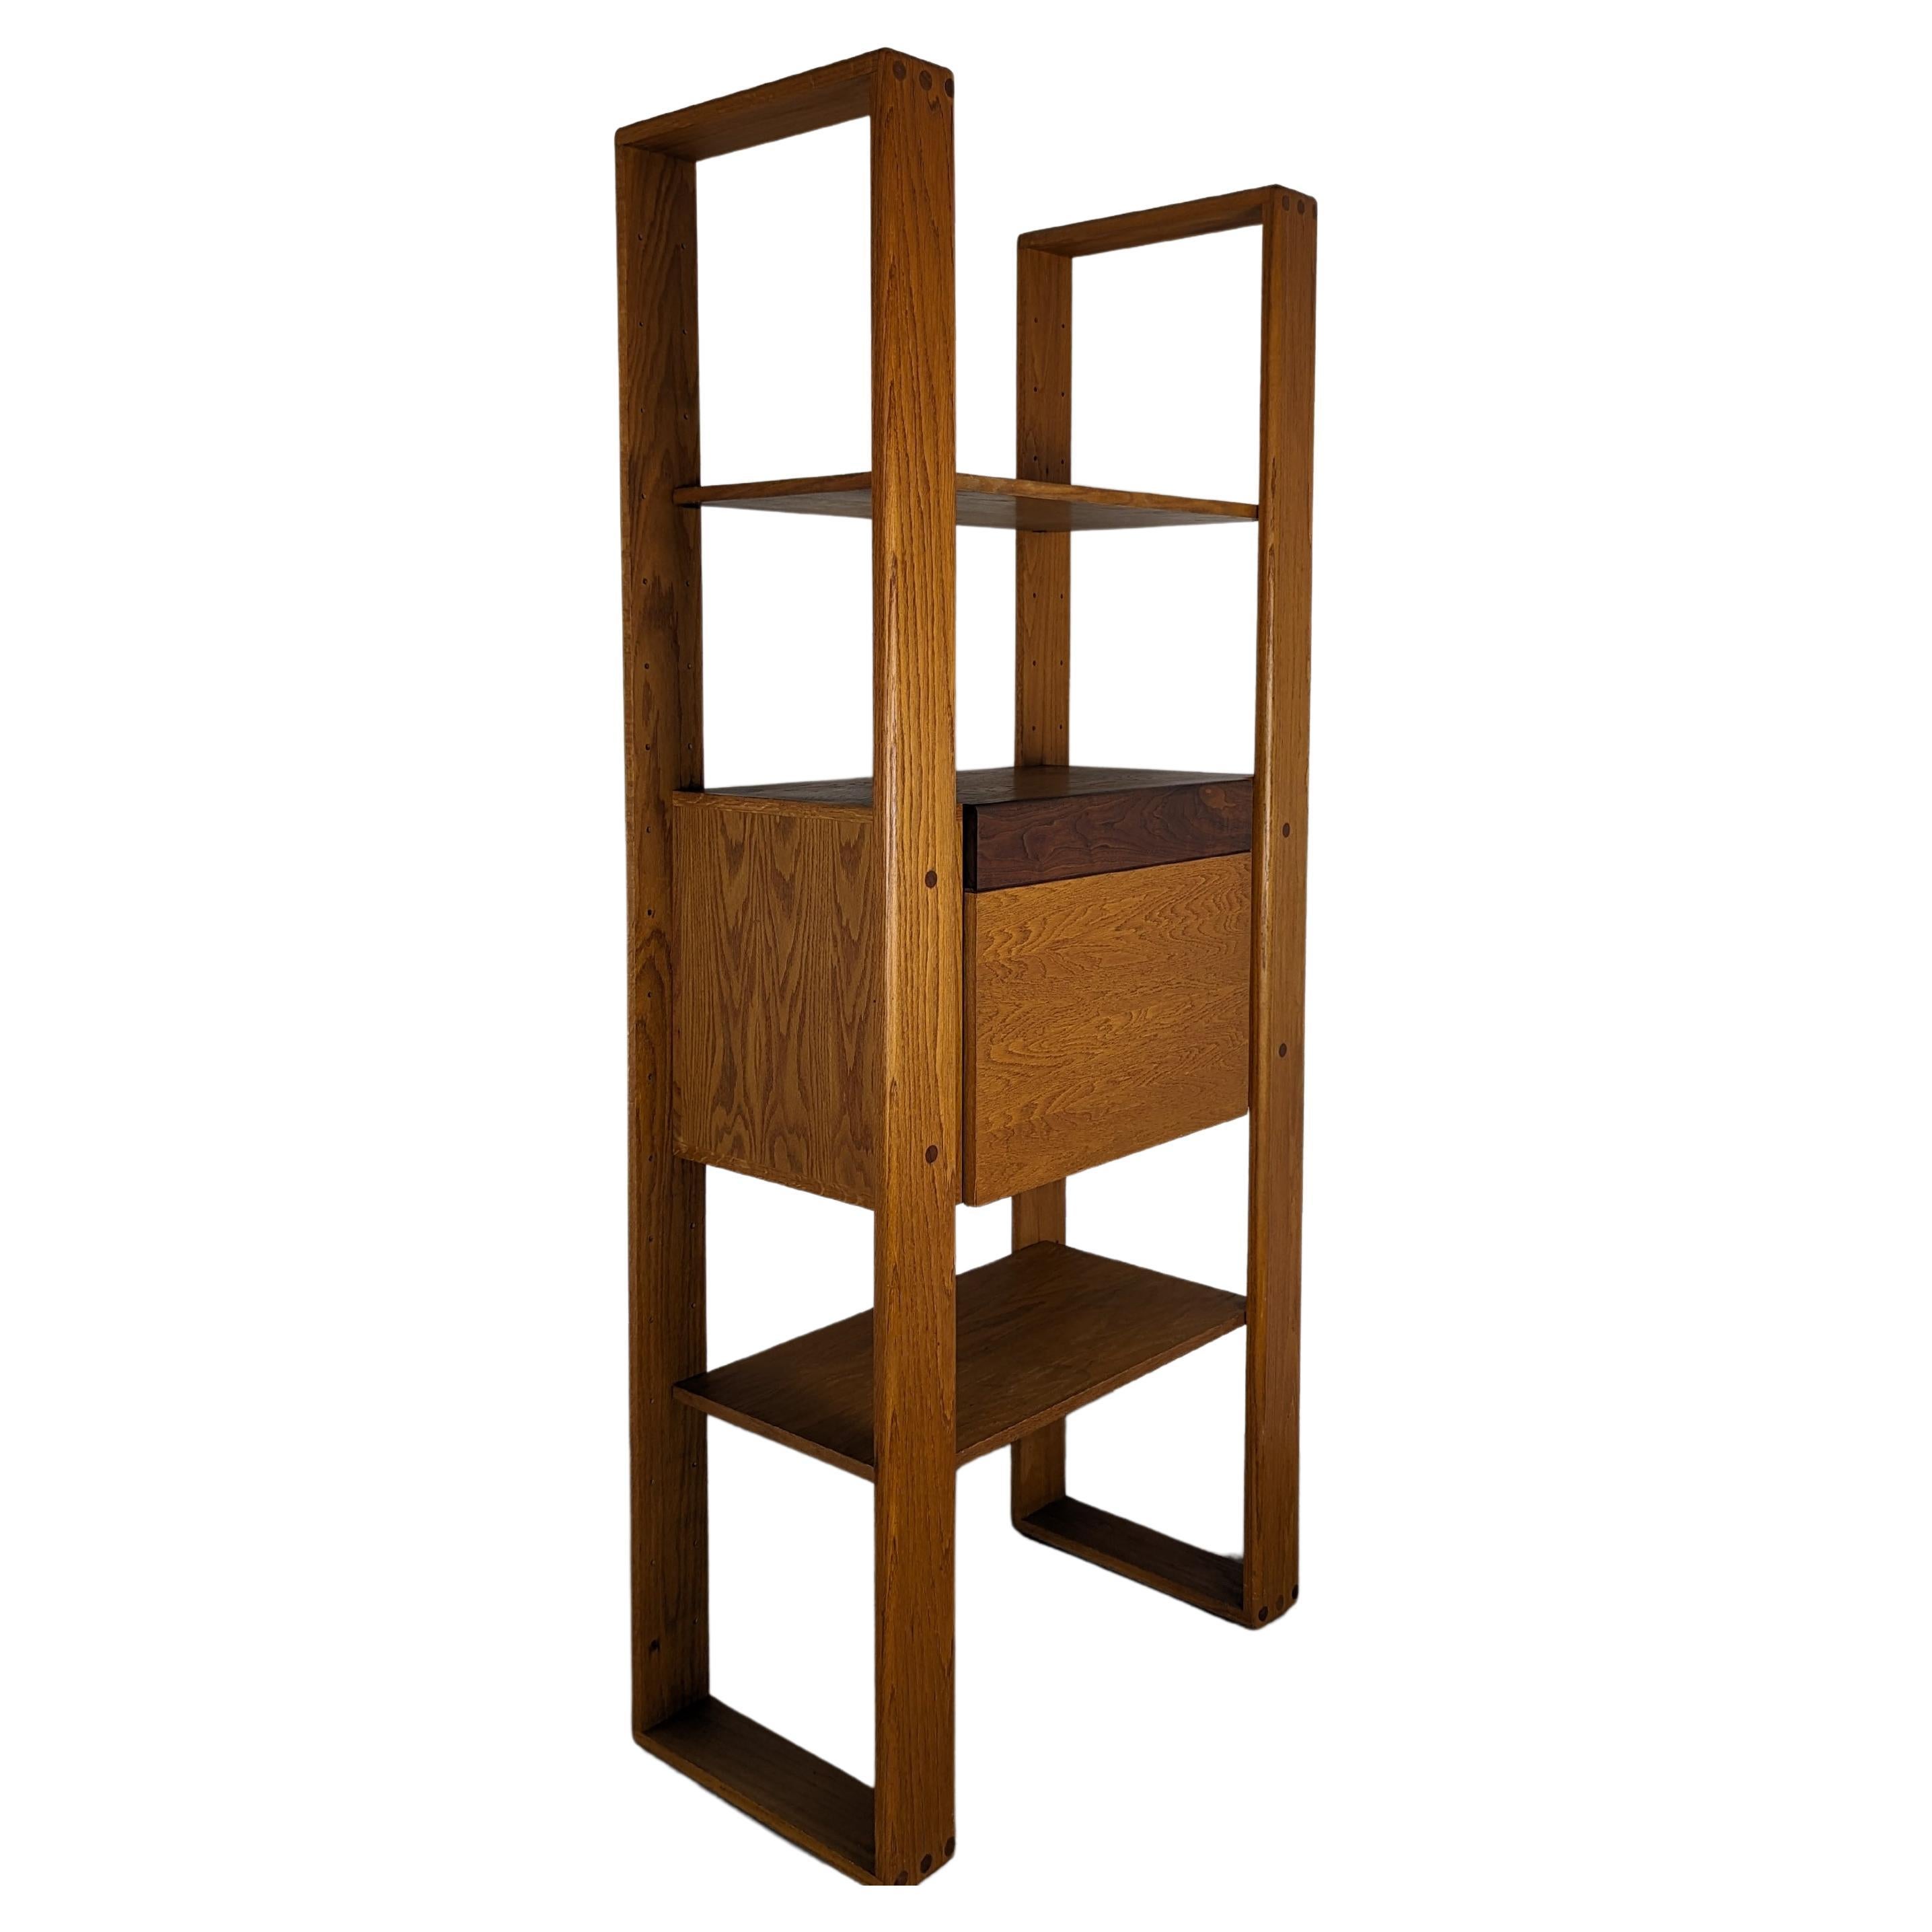 Cerused Oak Modular Bookcase or Room Divider by Lou Hodges, c1970s For Sale